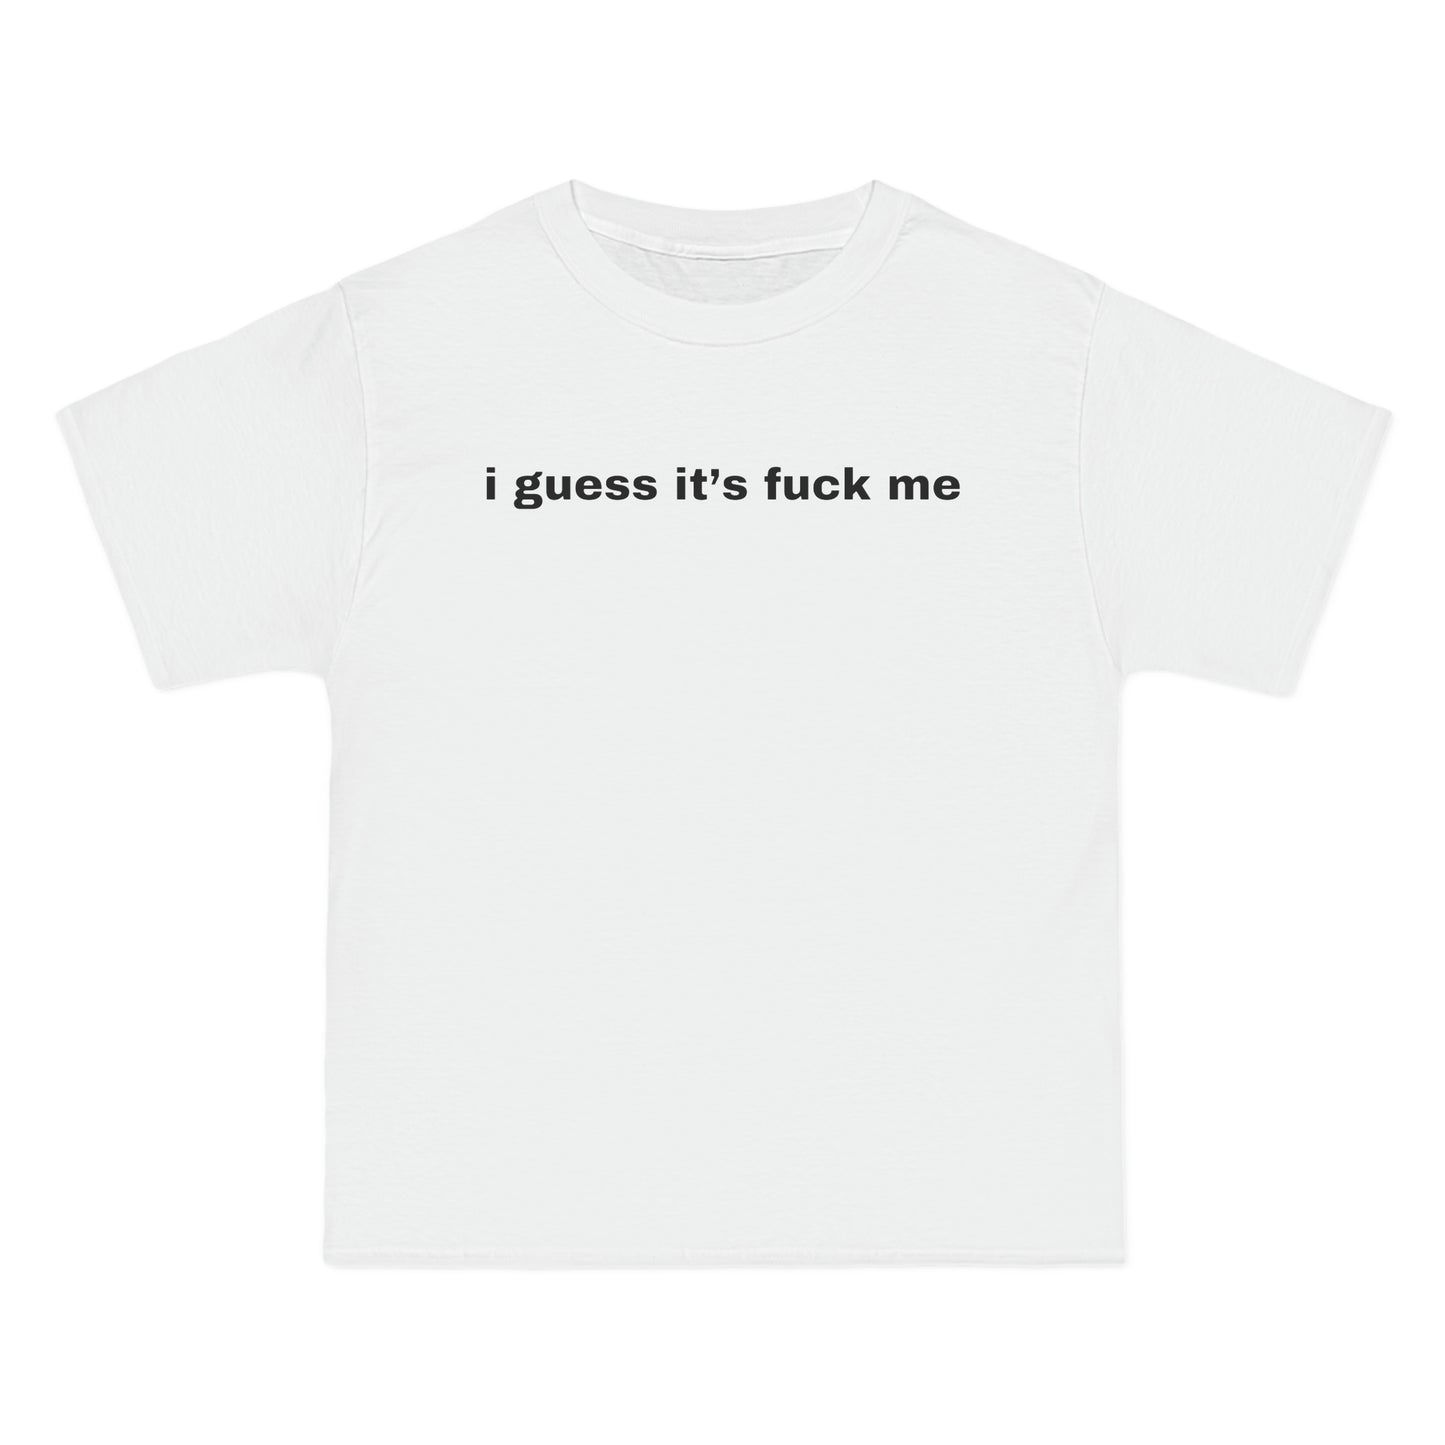 i guess it's fuck me Tee